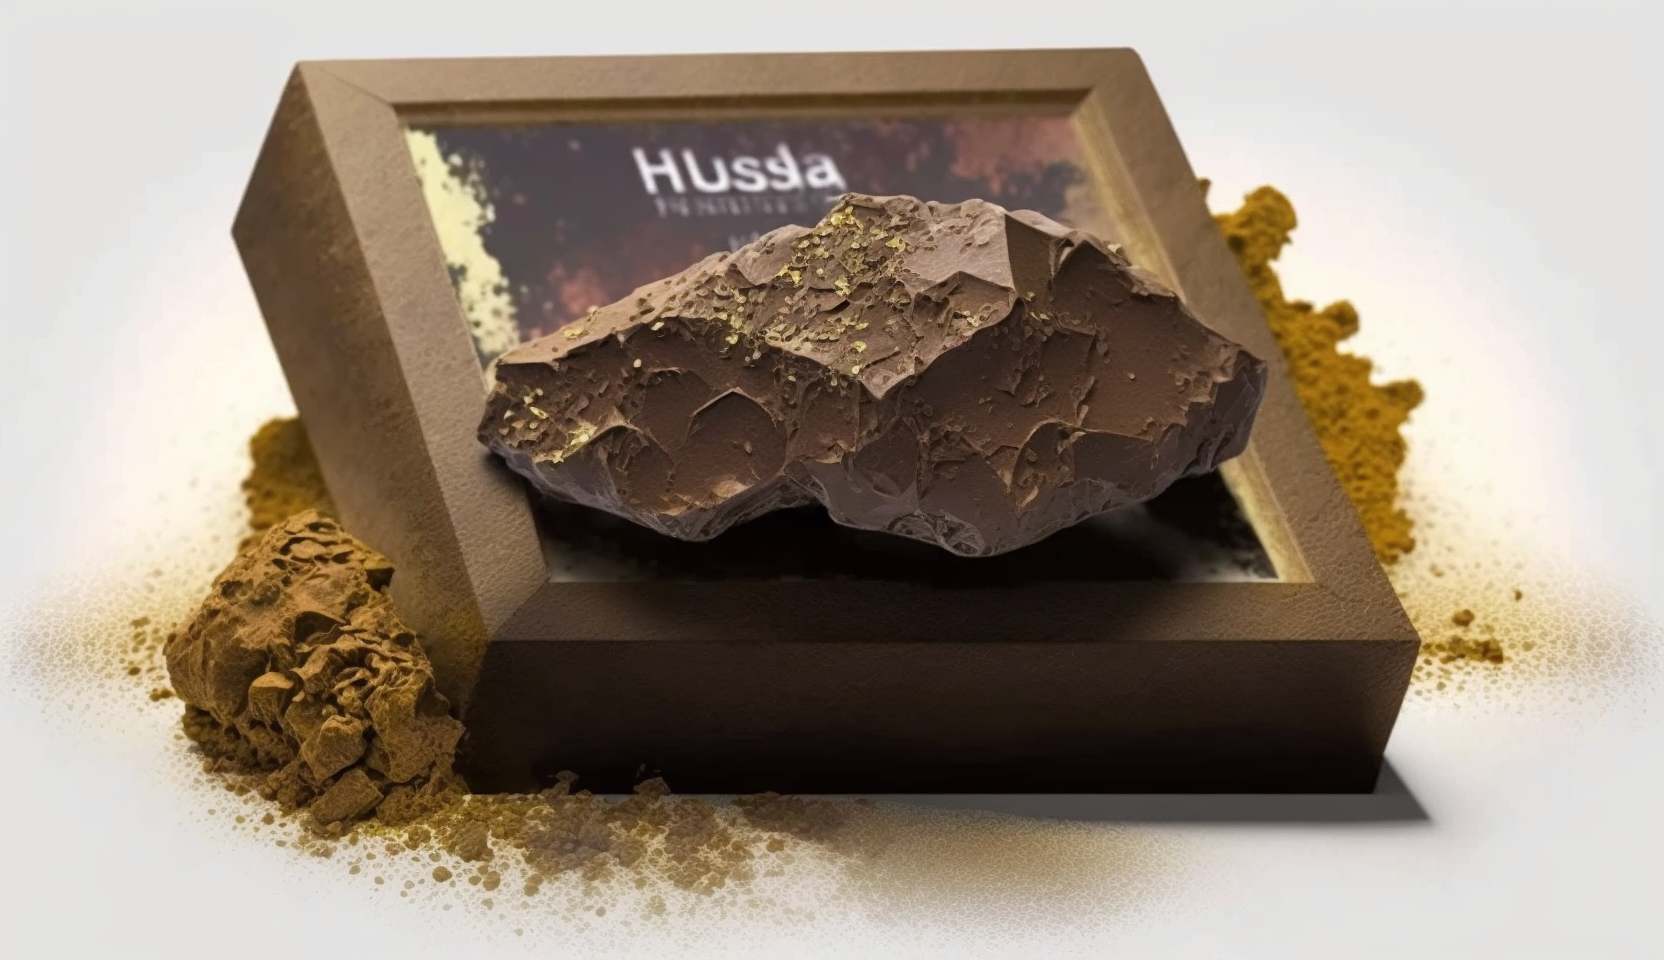 Step-by-step guide to accurately dose HHC hashish